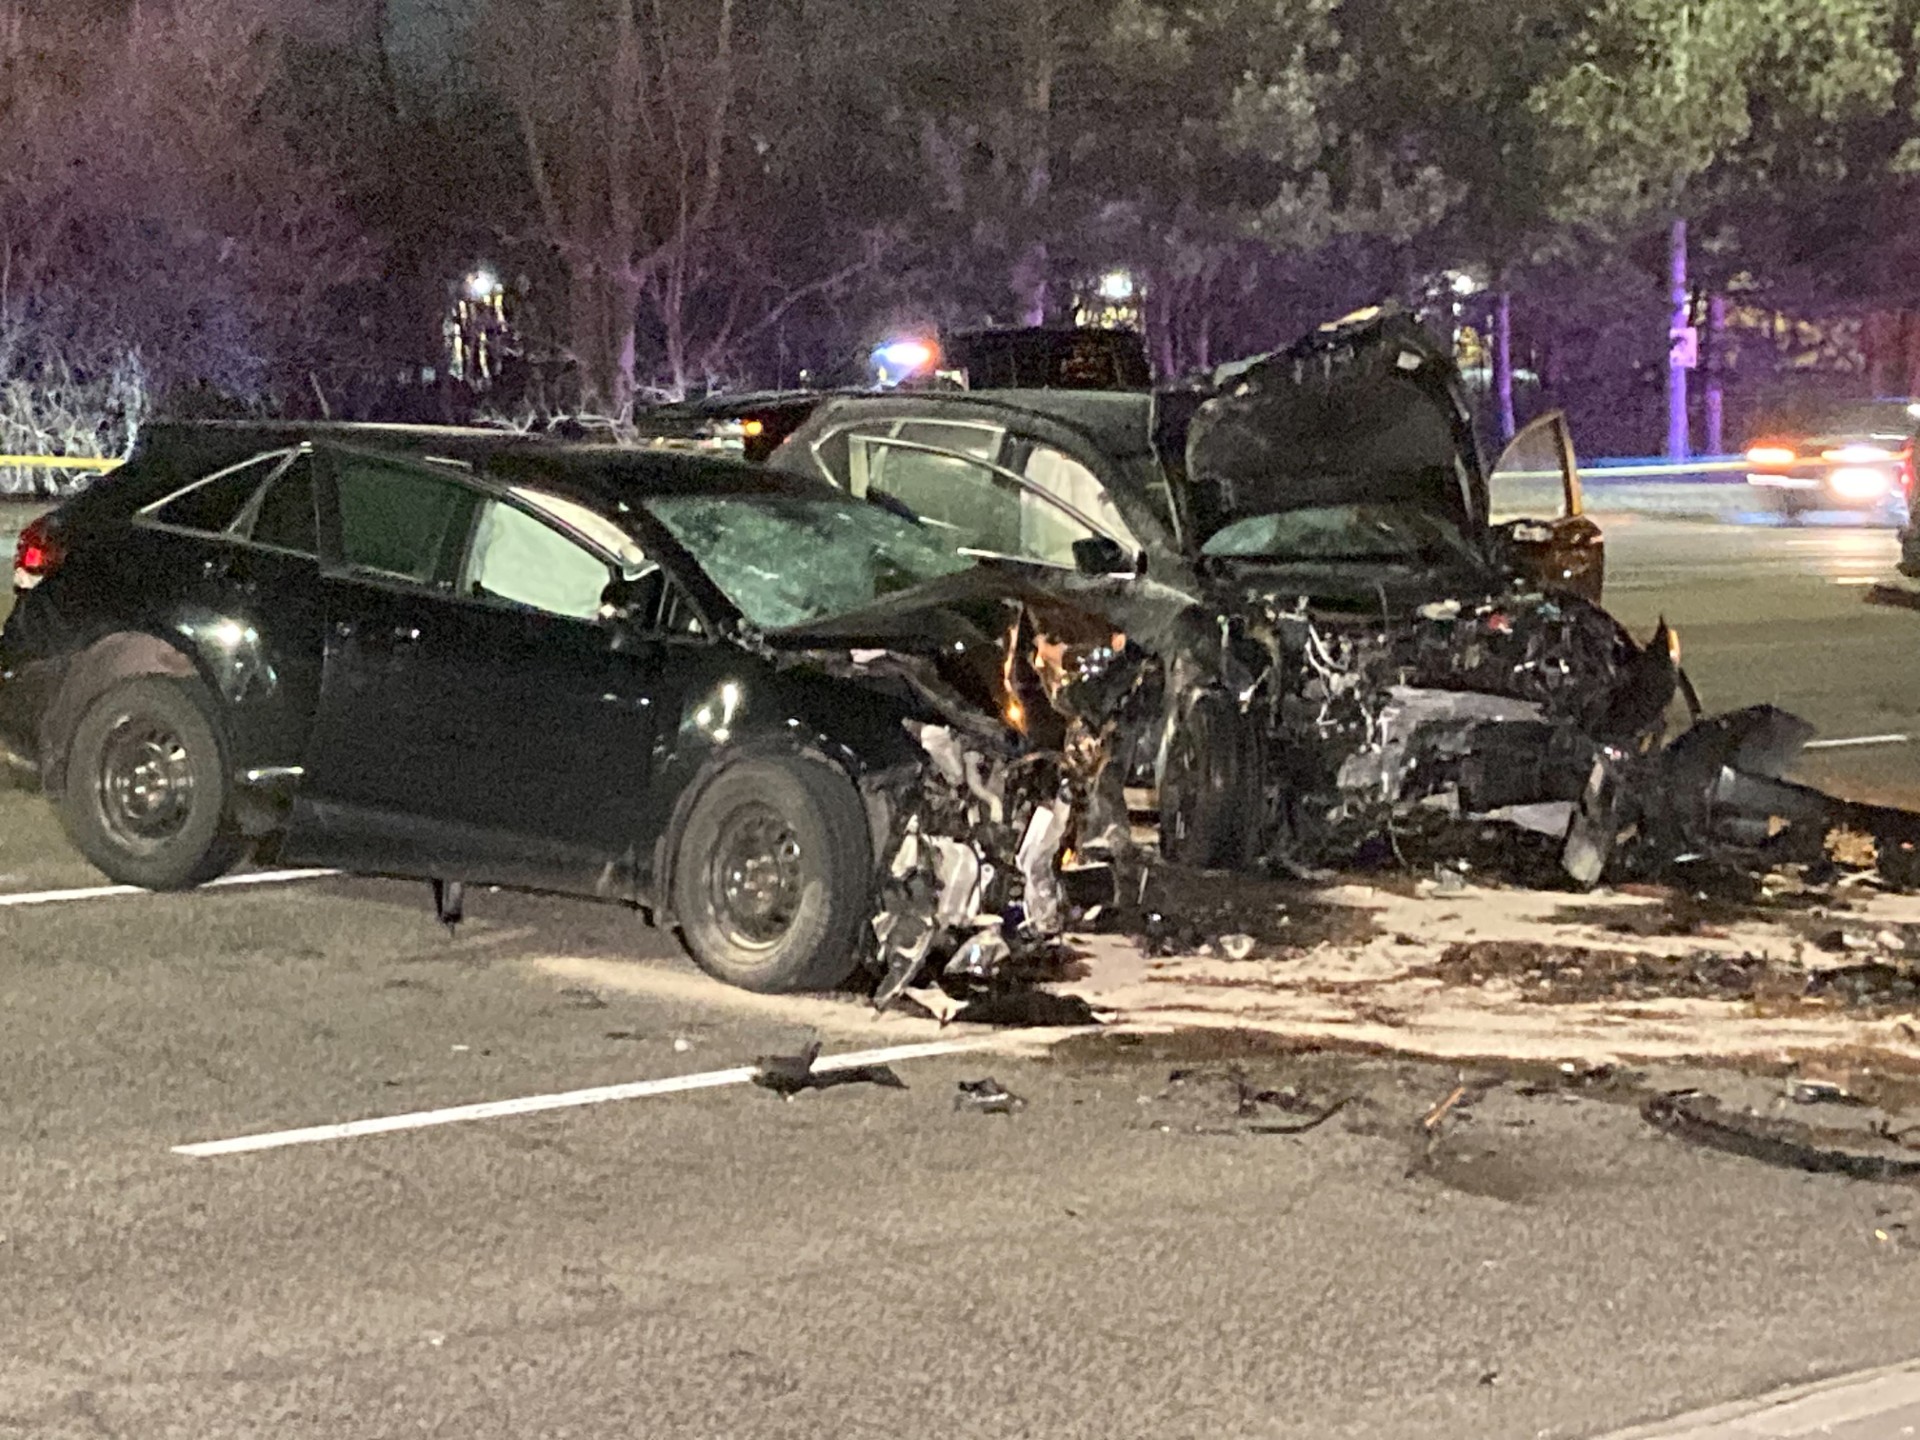 Street racing may have led to 3 car crash in Mississauga, police say